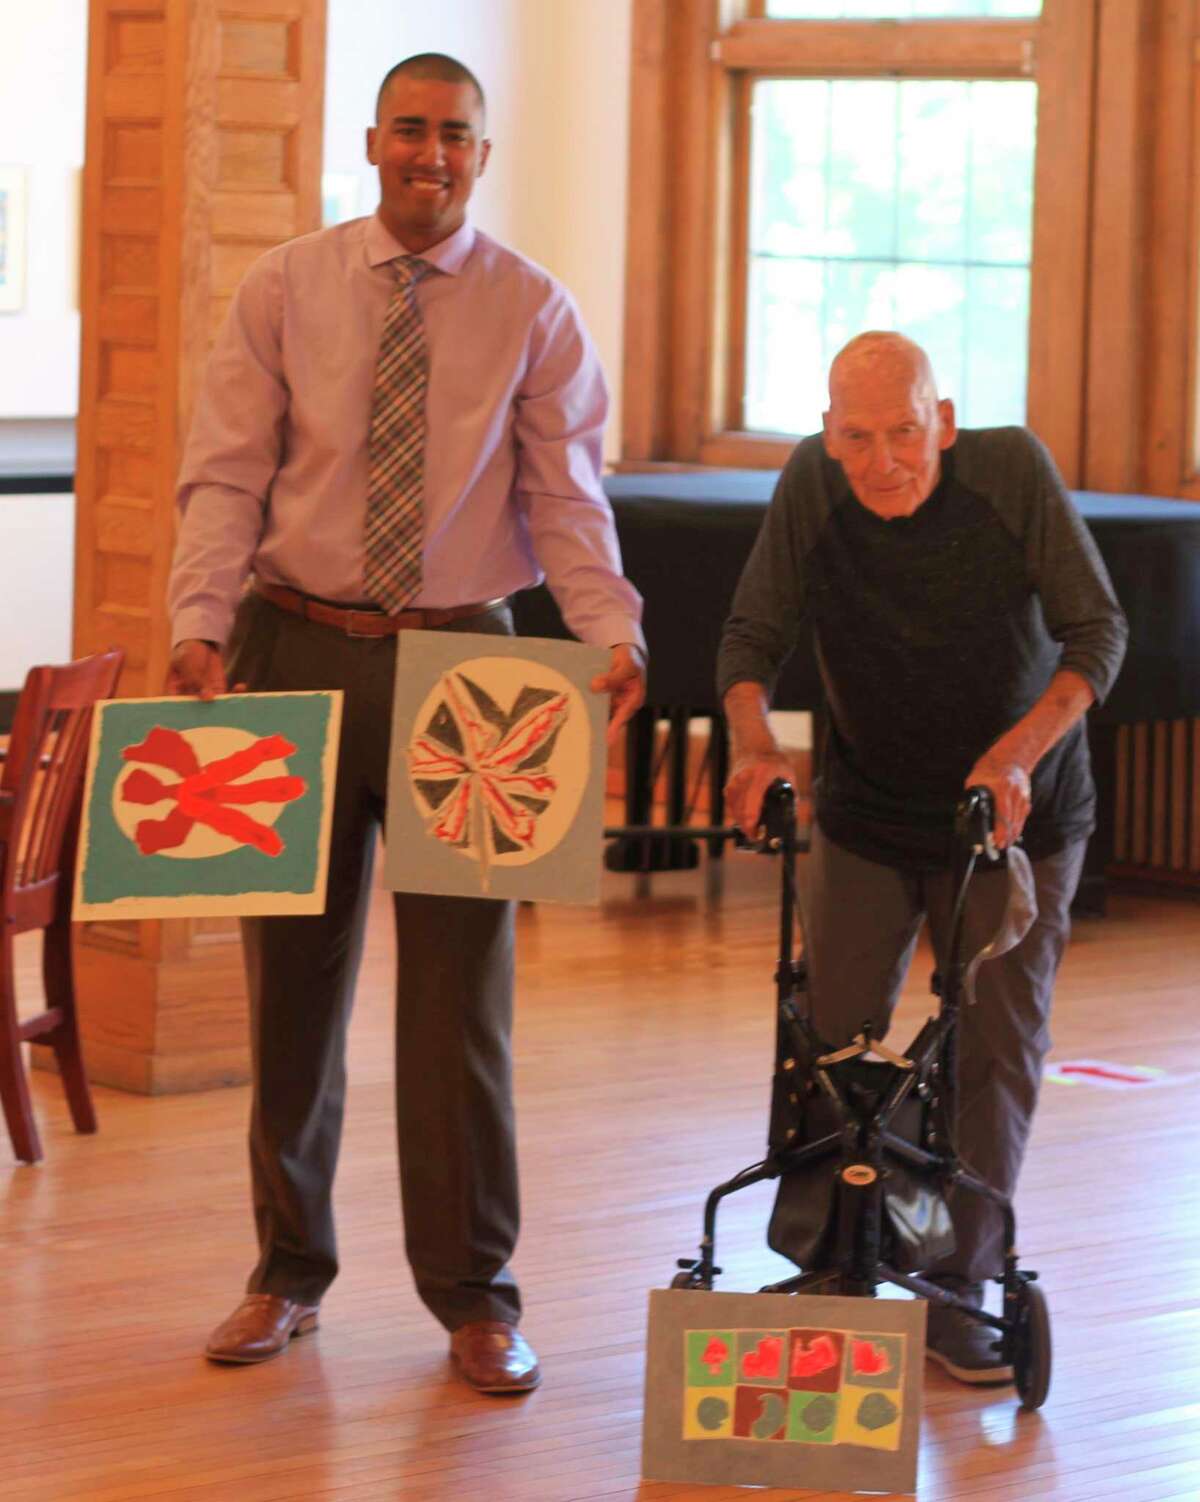 Executive director of the Ramsdell Regional Center for the Arts, Xavier Verna (left) stands with Manistee native and nationally renowned artist Leslie Laskey and three paintings Laskey donated to the RRCA in August 2020. (Kyle Kotecki/News Advocate)